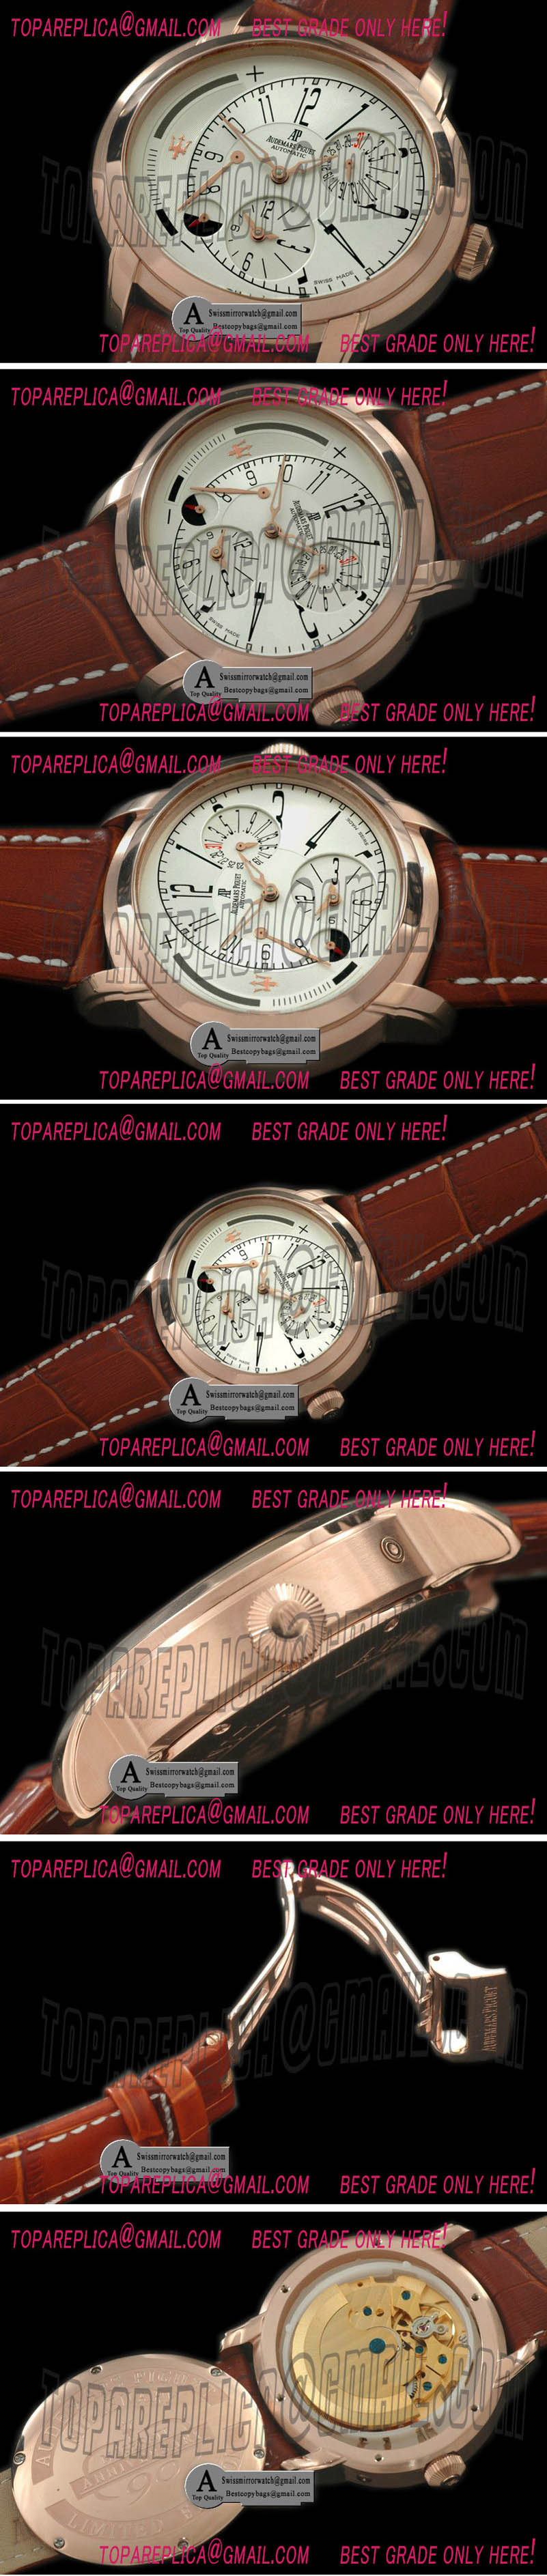 Audemars Piguet Millenary Reserve/Duo Time Rose Gold/Leather White Asian 23J Automatic Replica Watches